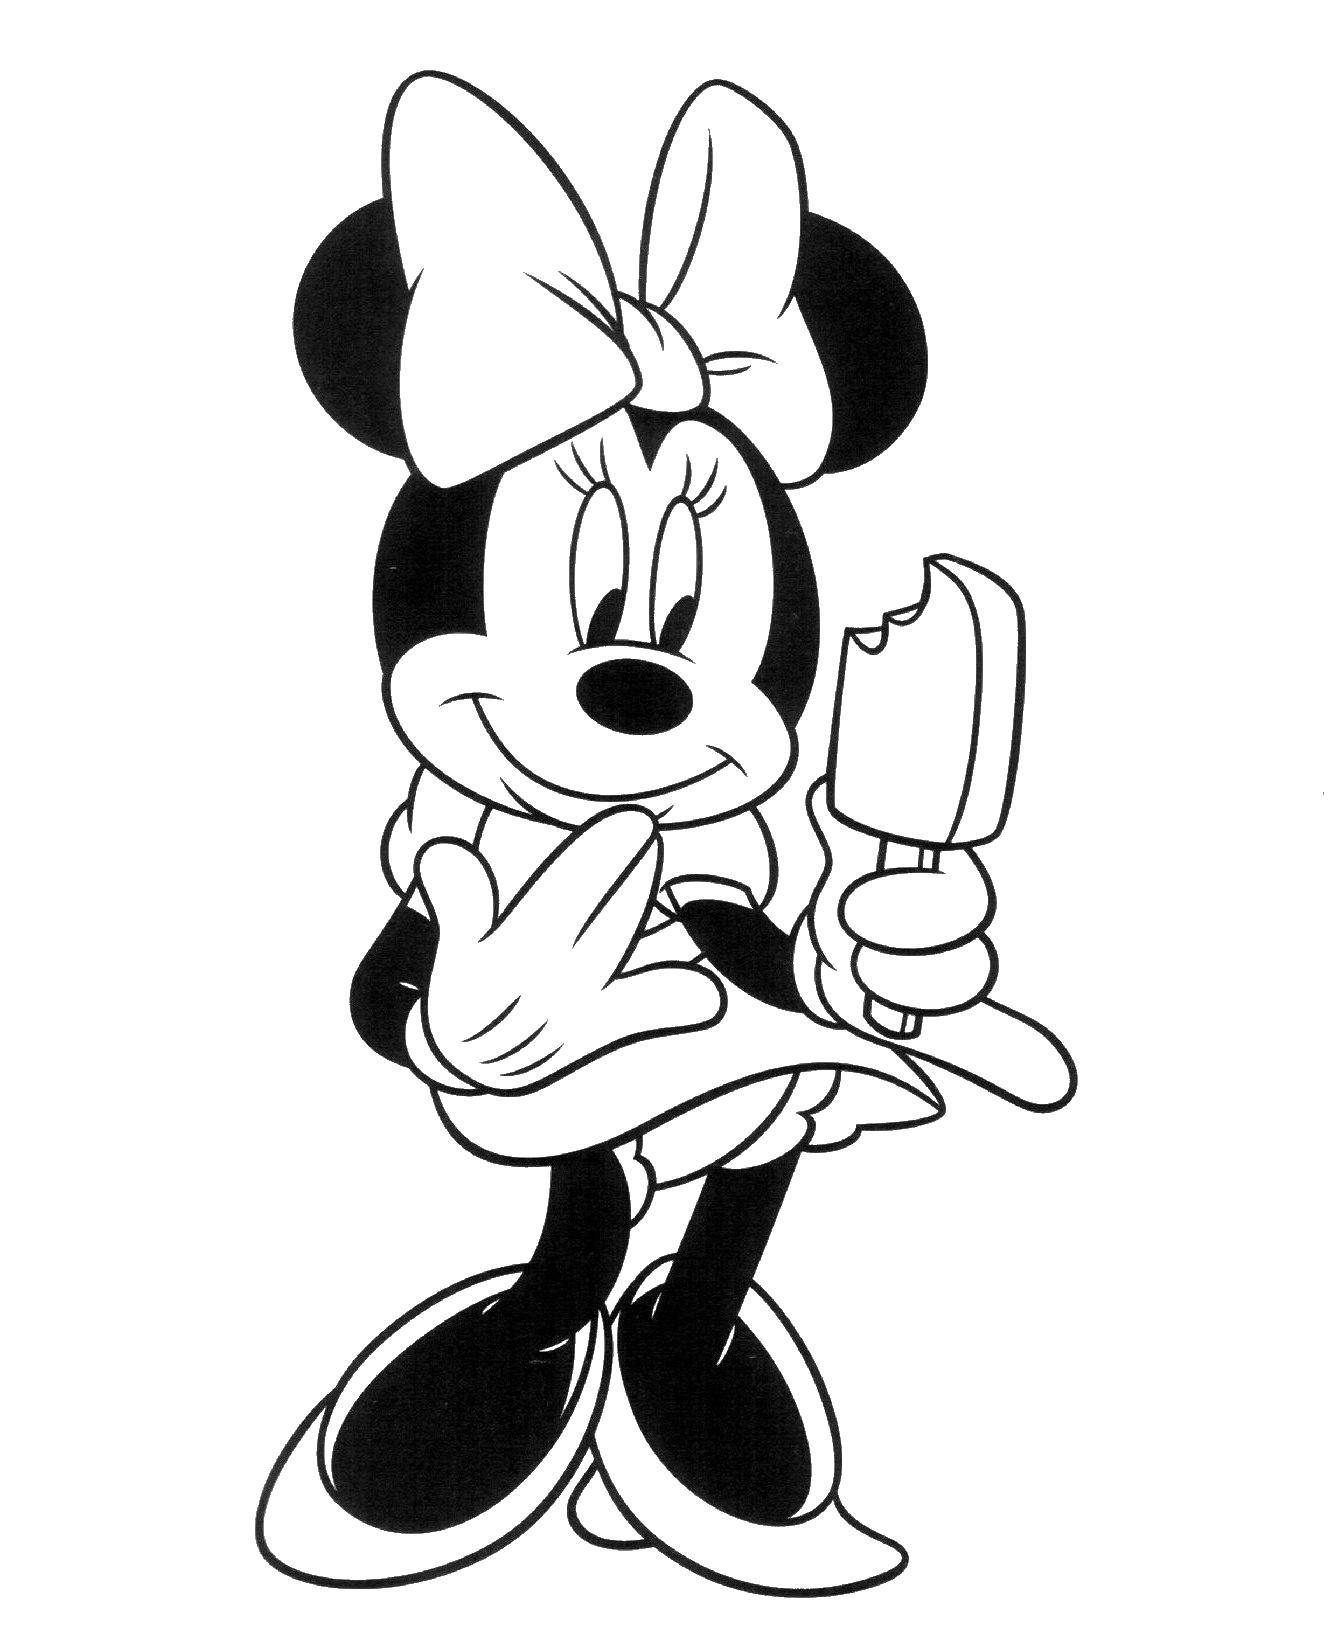 Minnie Mouse Eating Popsicle Coloring Page